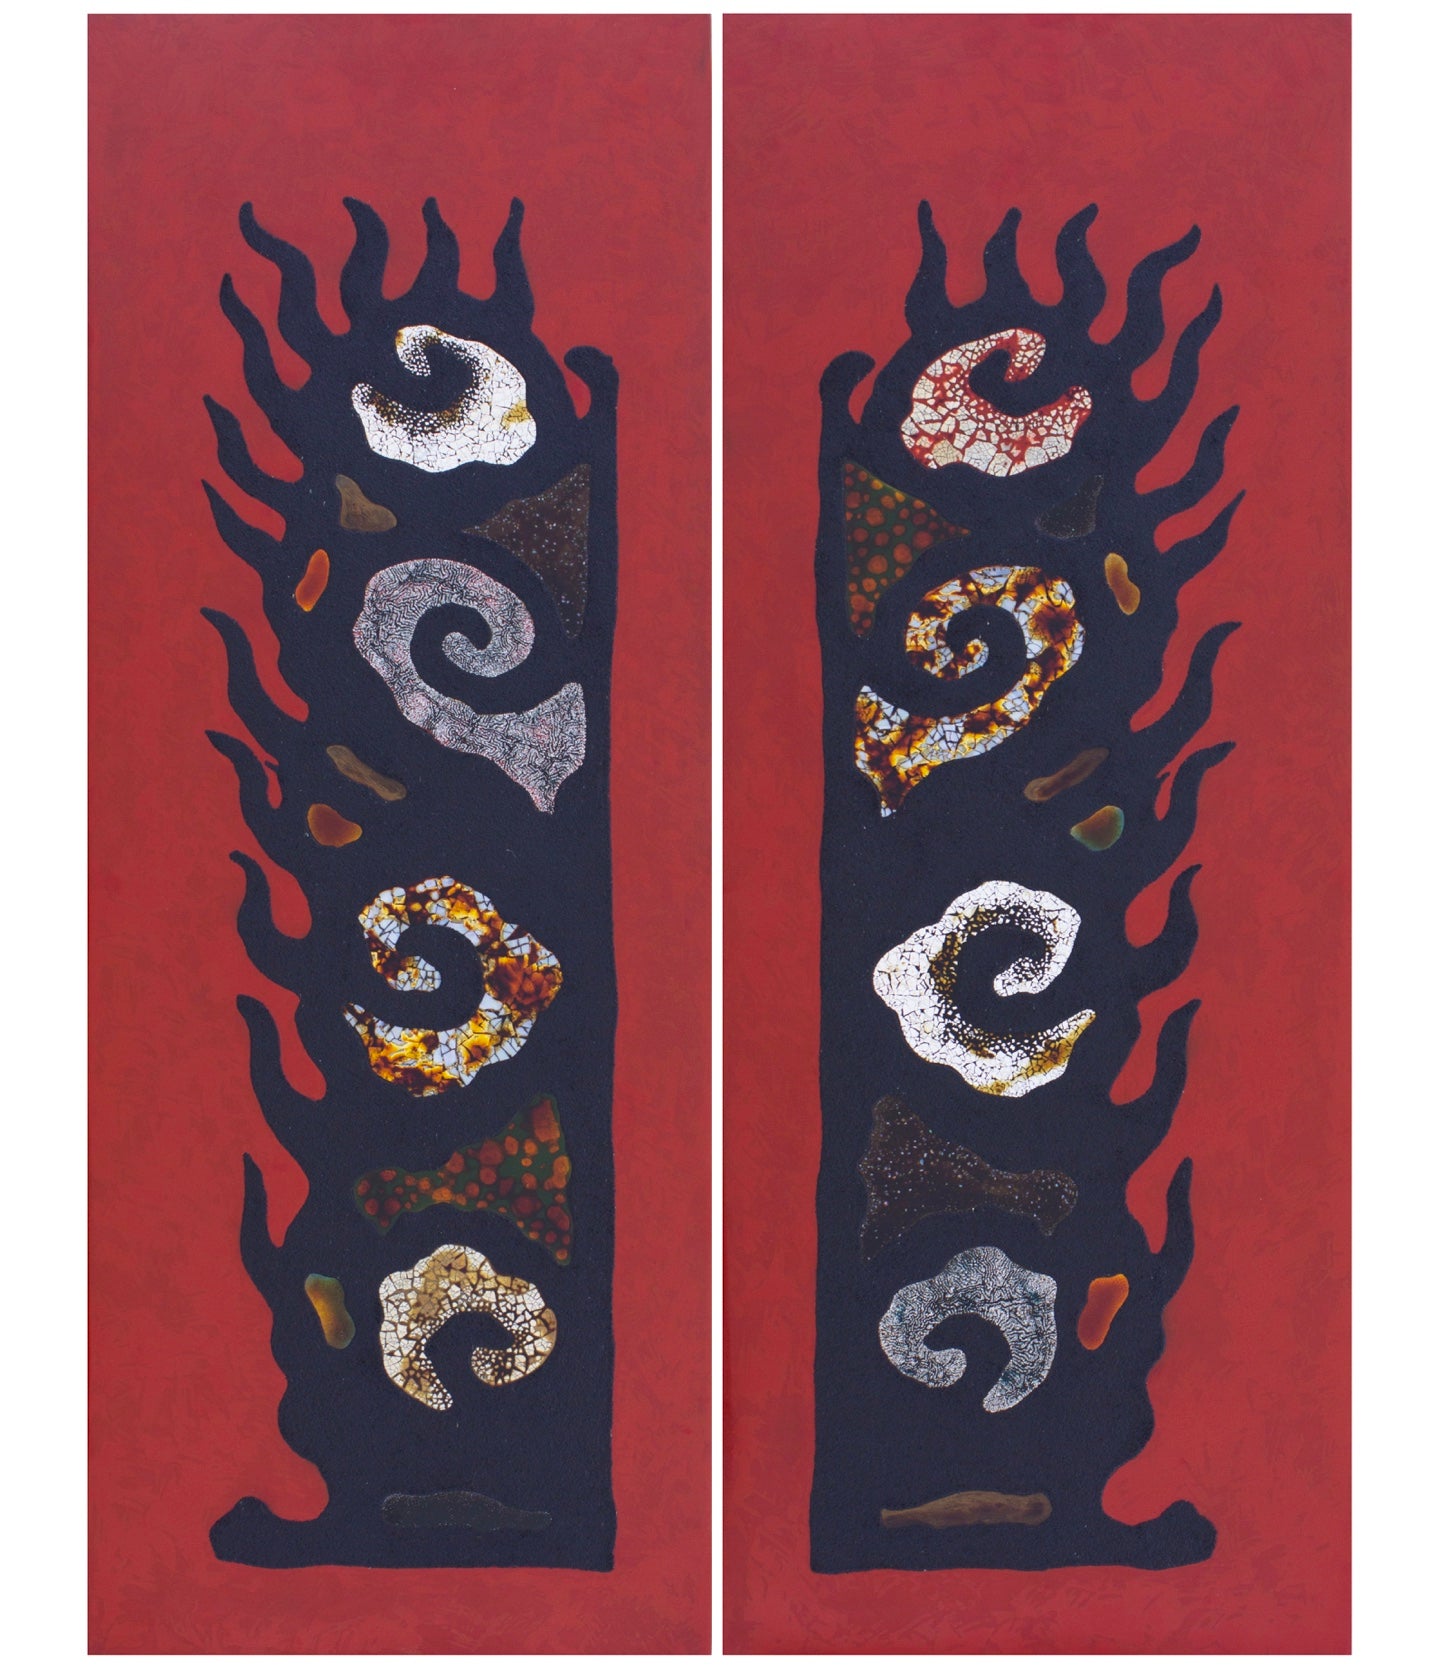 Firegate #1 by The (Orange and Black - Diptych)